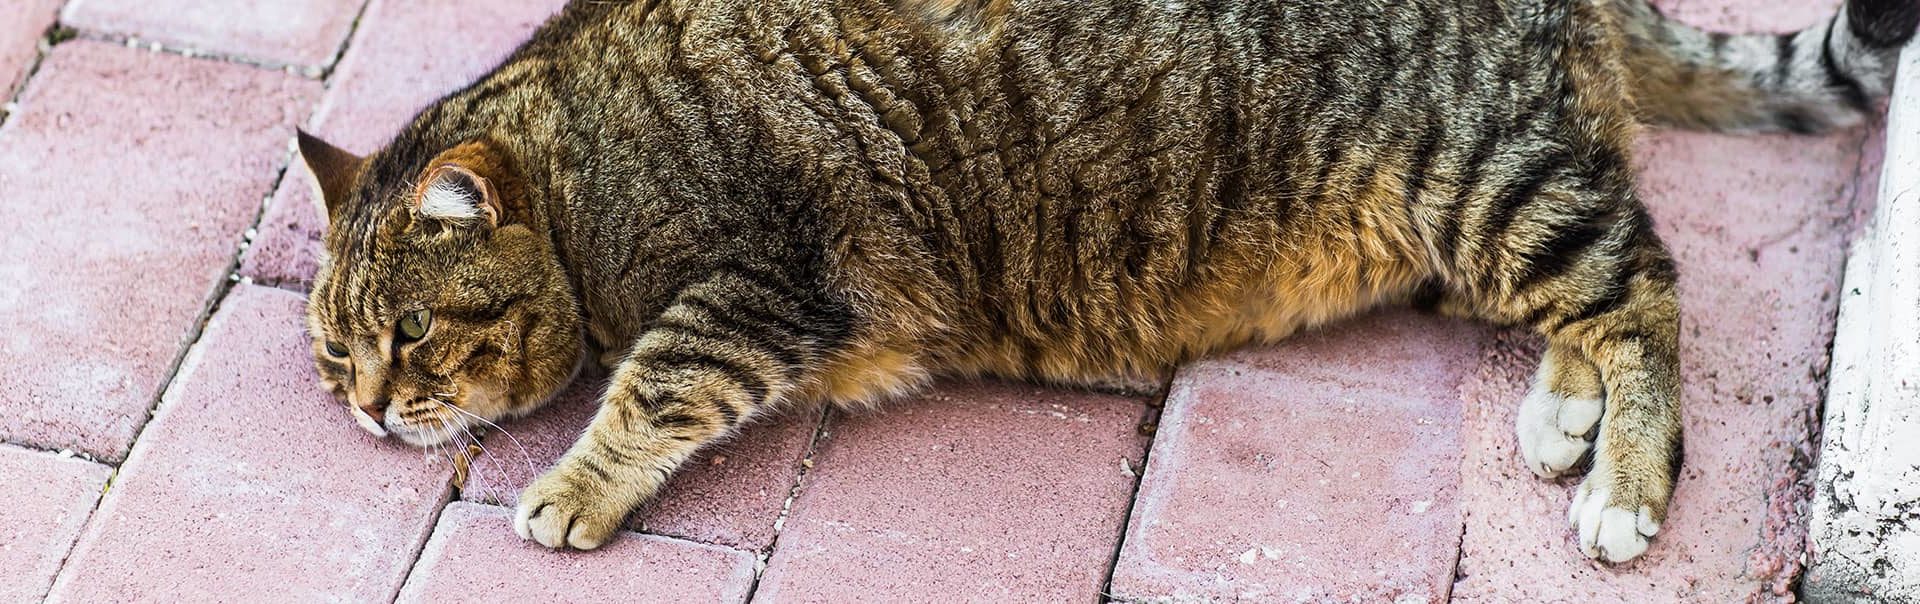 Overweight cat lying on a brick floor